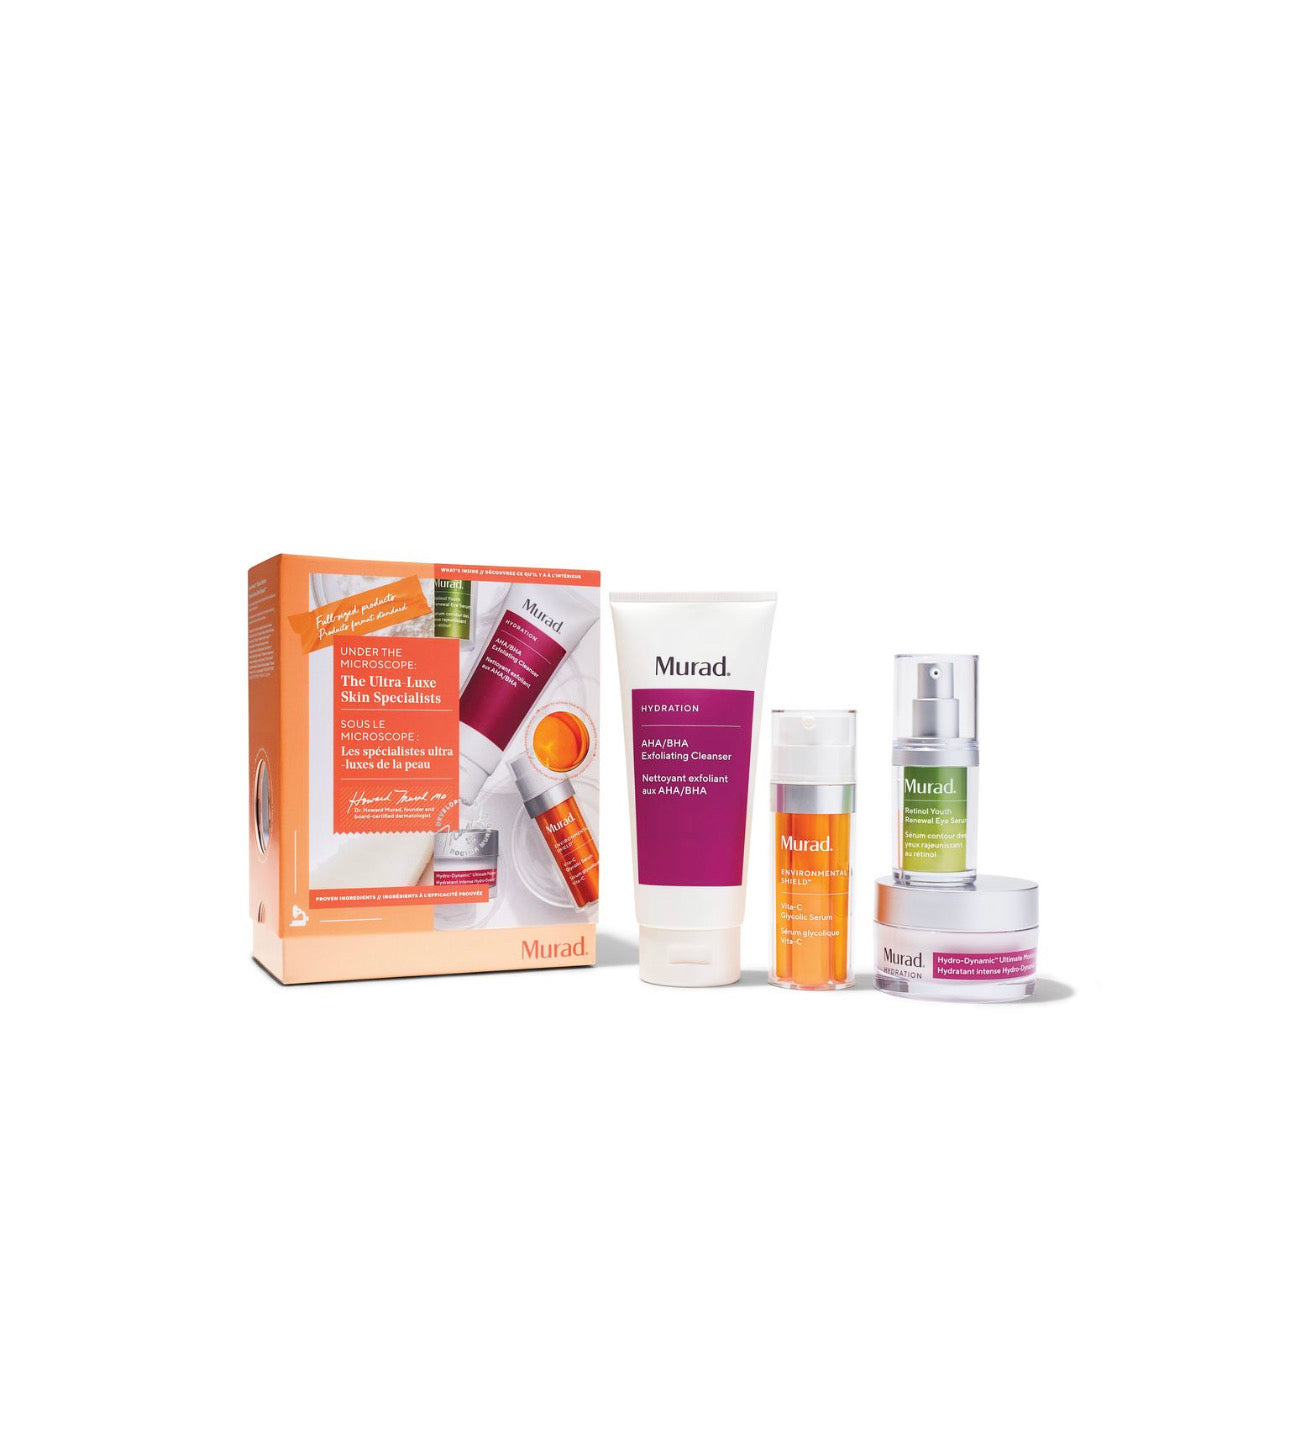 Murad The Ultra Luxe Skin Specialists Gift Set